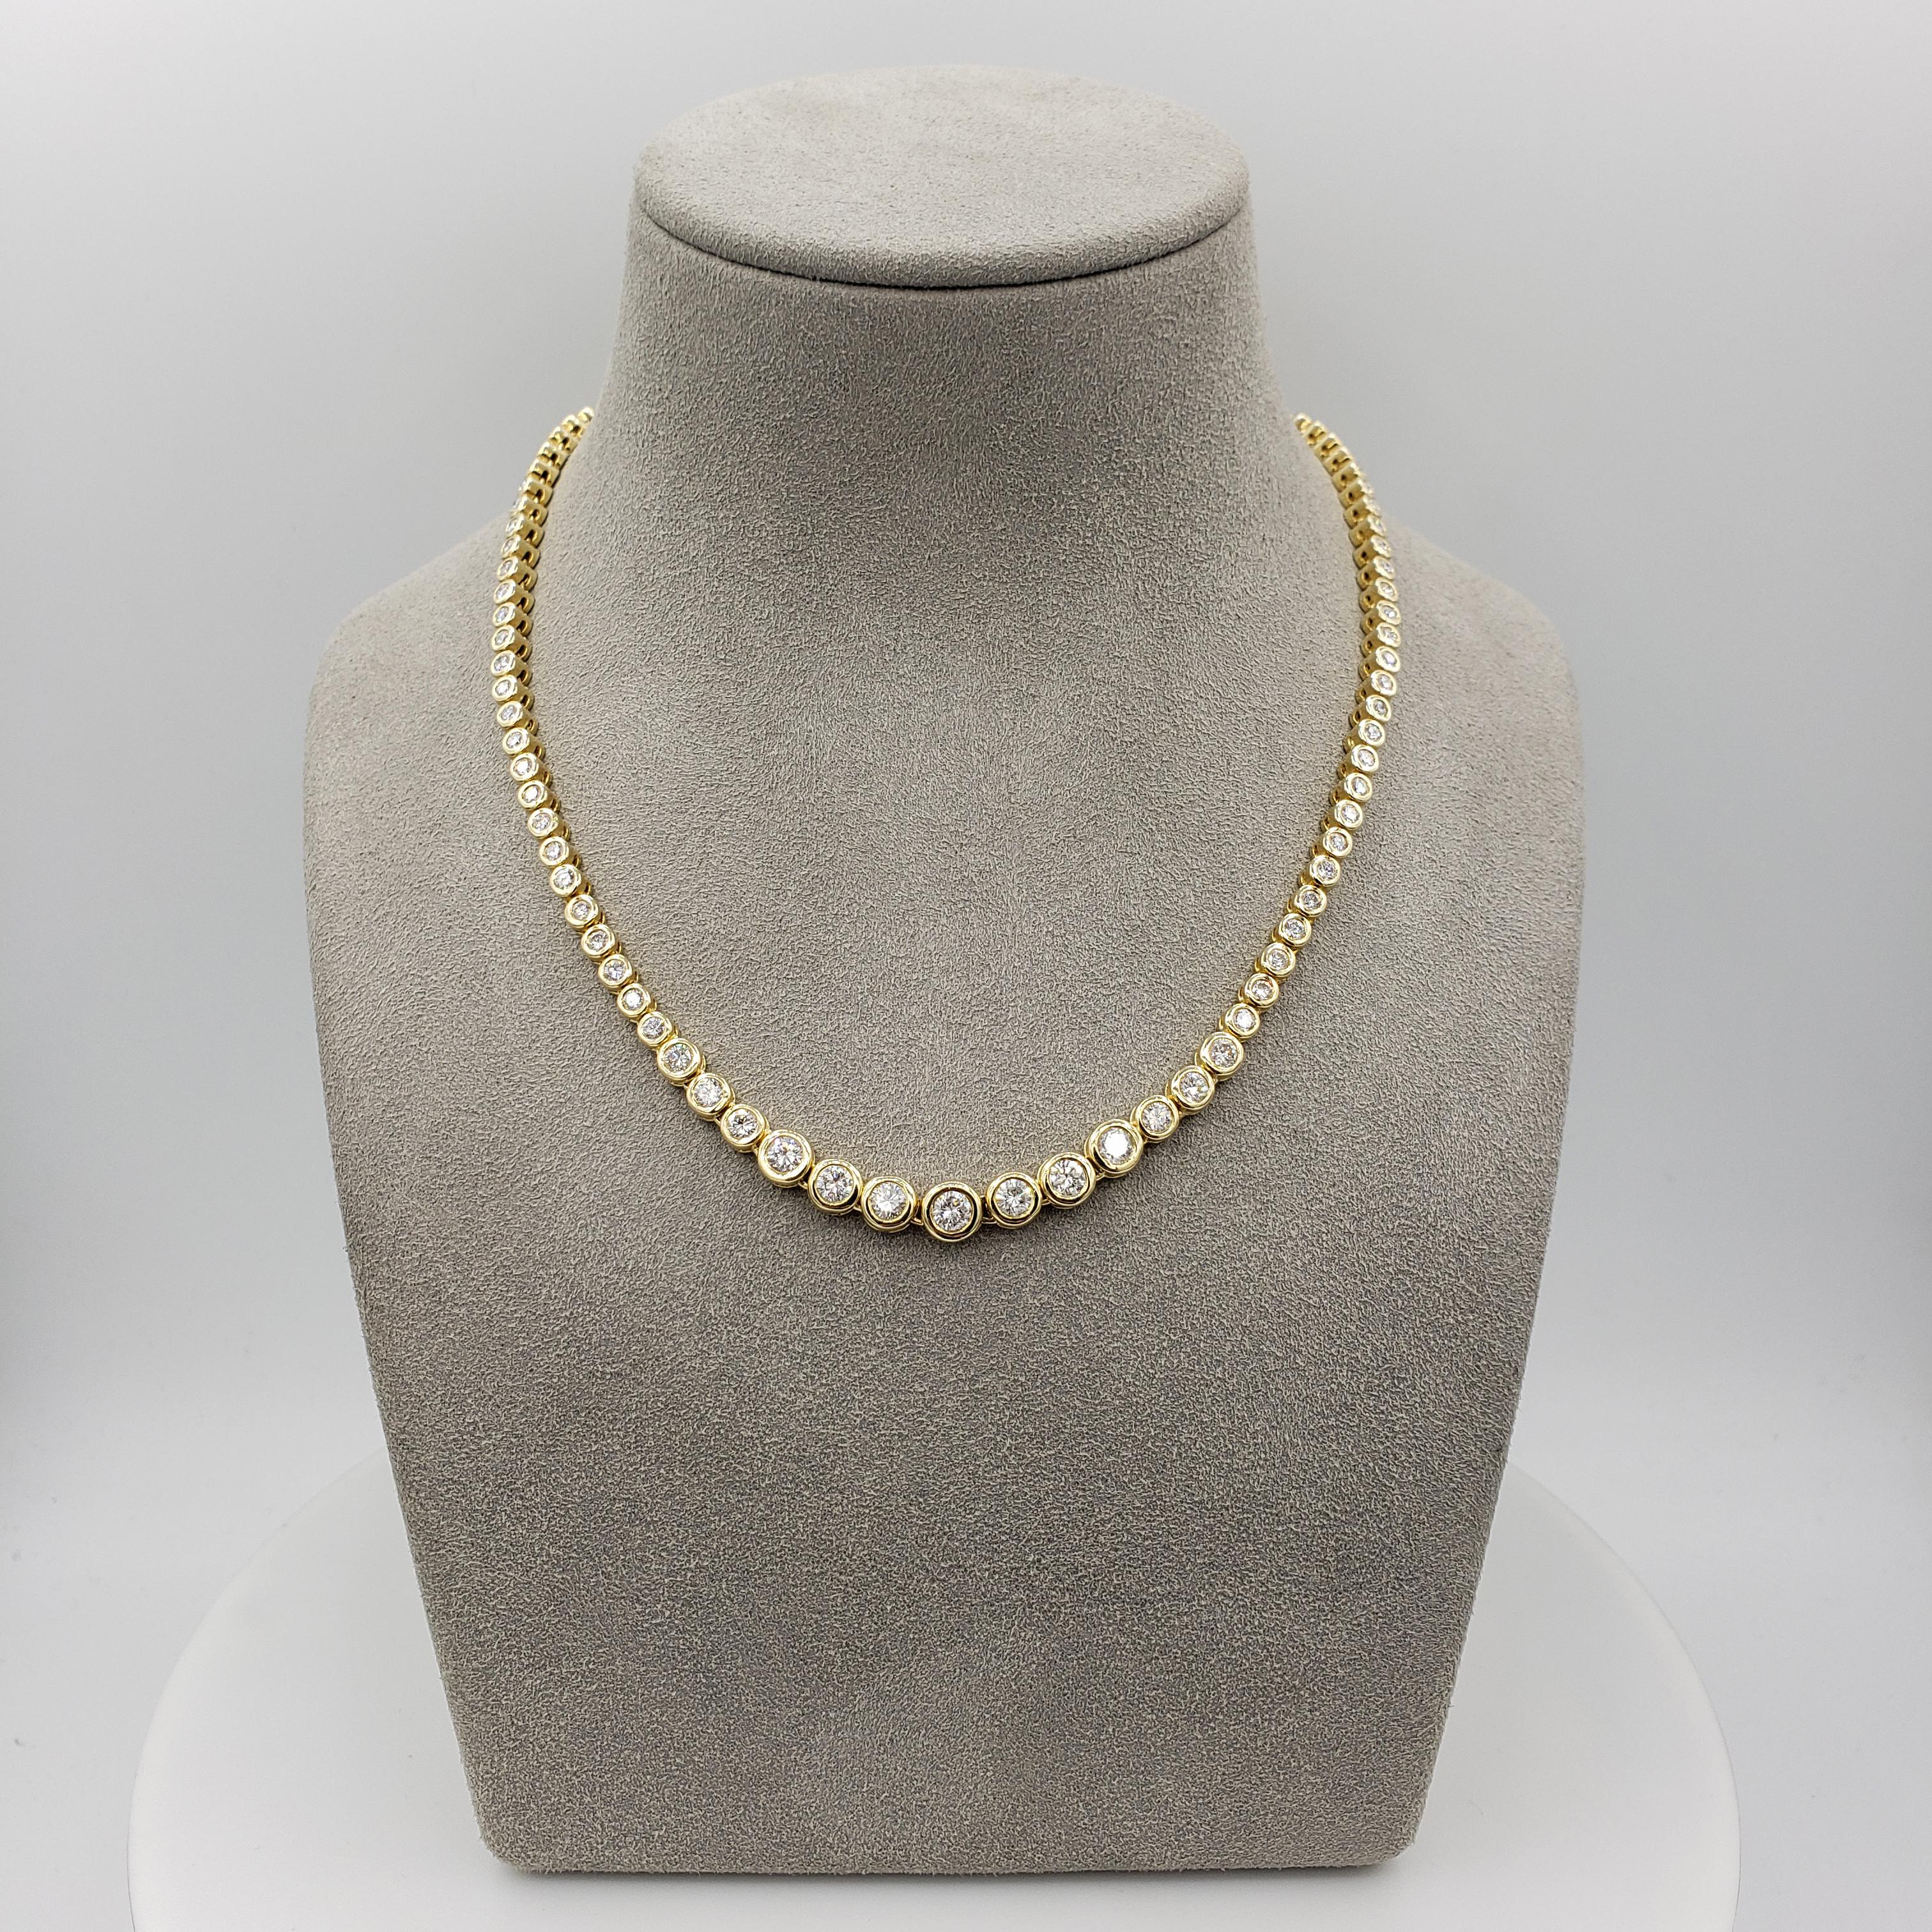 A classic and versatile tennis necklace showcasing a row of round brilliant diamonds that graduate larger as it drops to the center of the necklace. Each diamond is bezel set in 14k yellow gold. Diamonds weigh 6.17 carats total.

Style available in